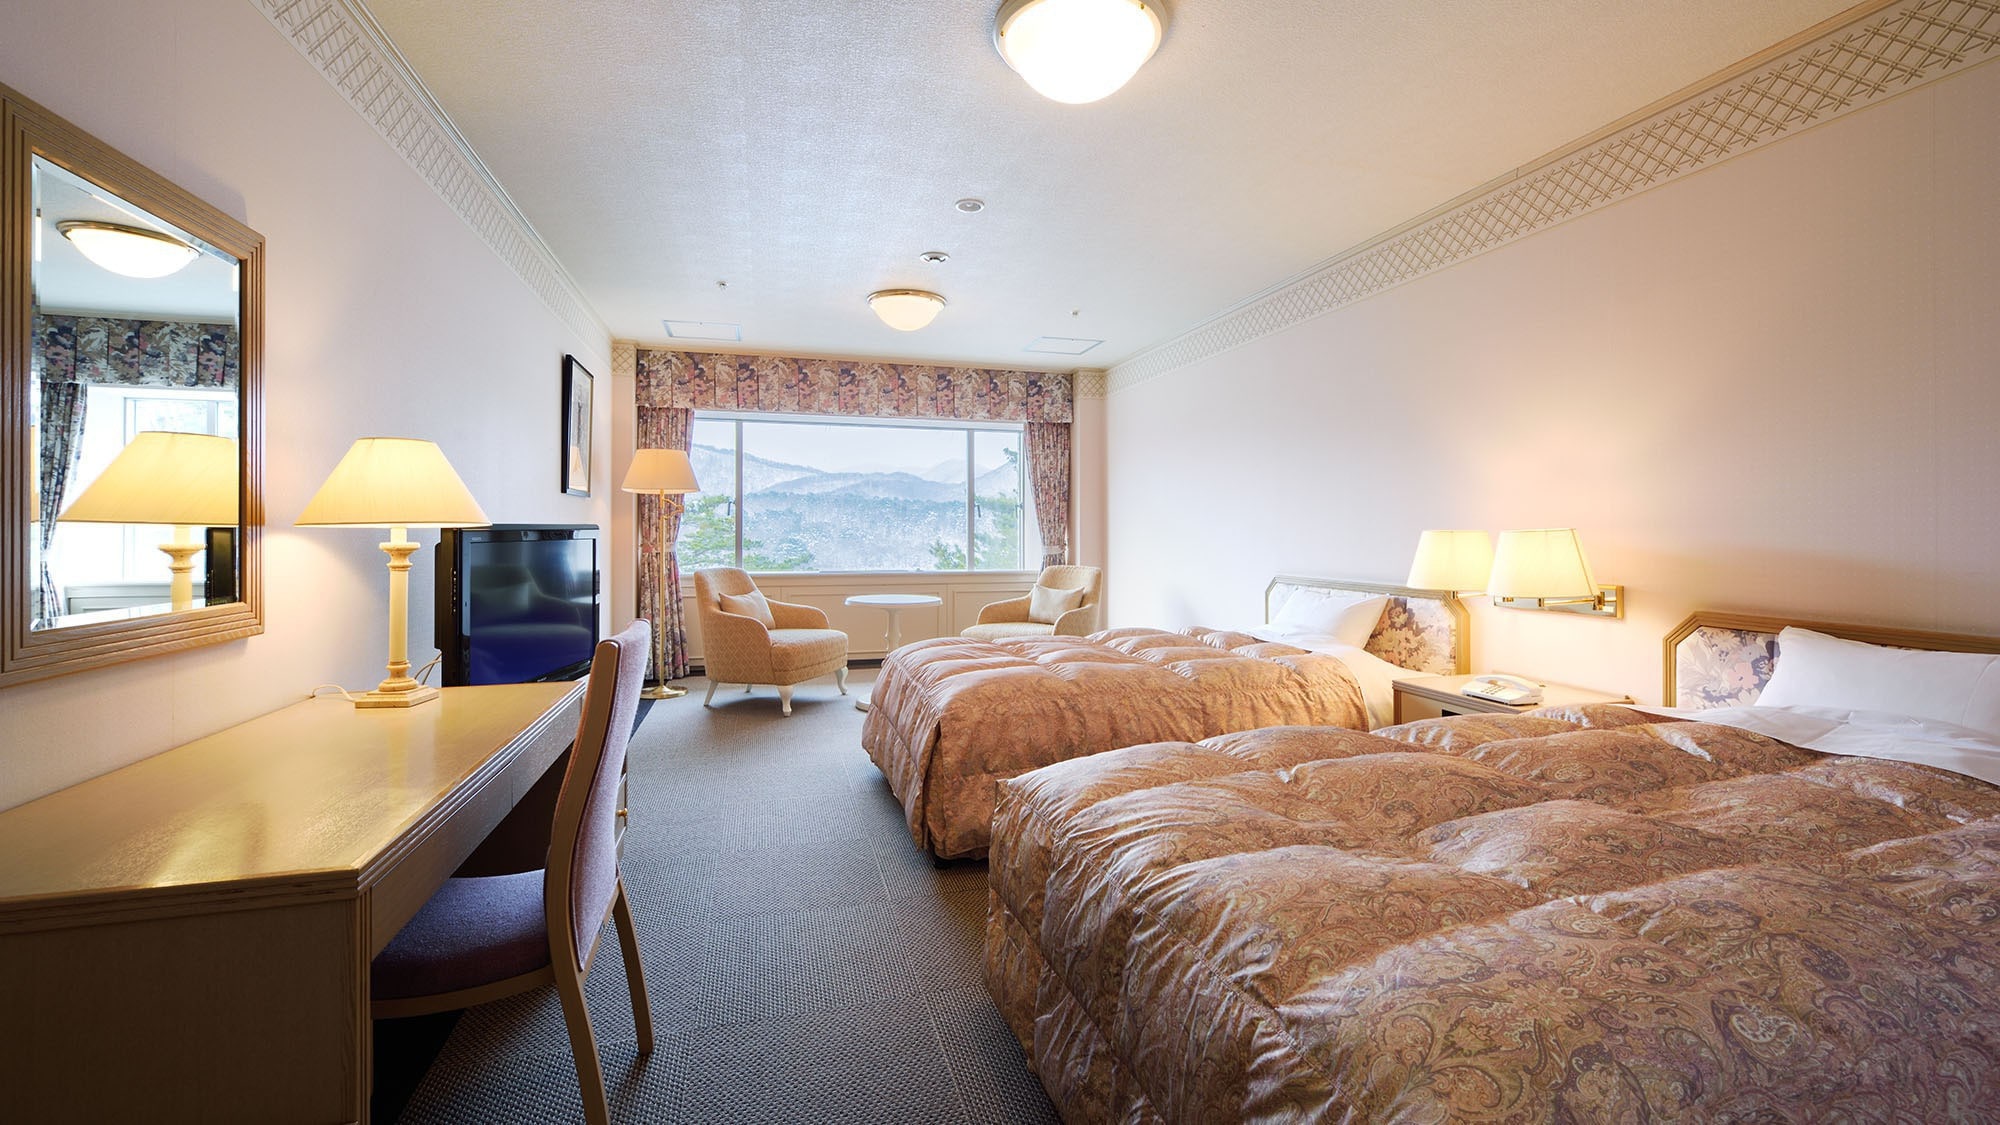 [Superior Twin] 41 square meters. It is a twin room where you can relax and relax.